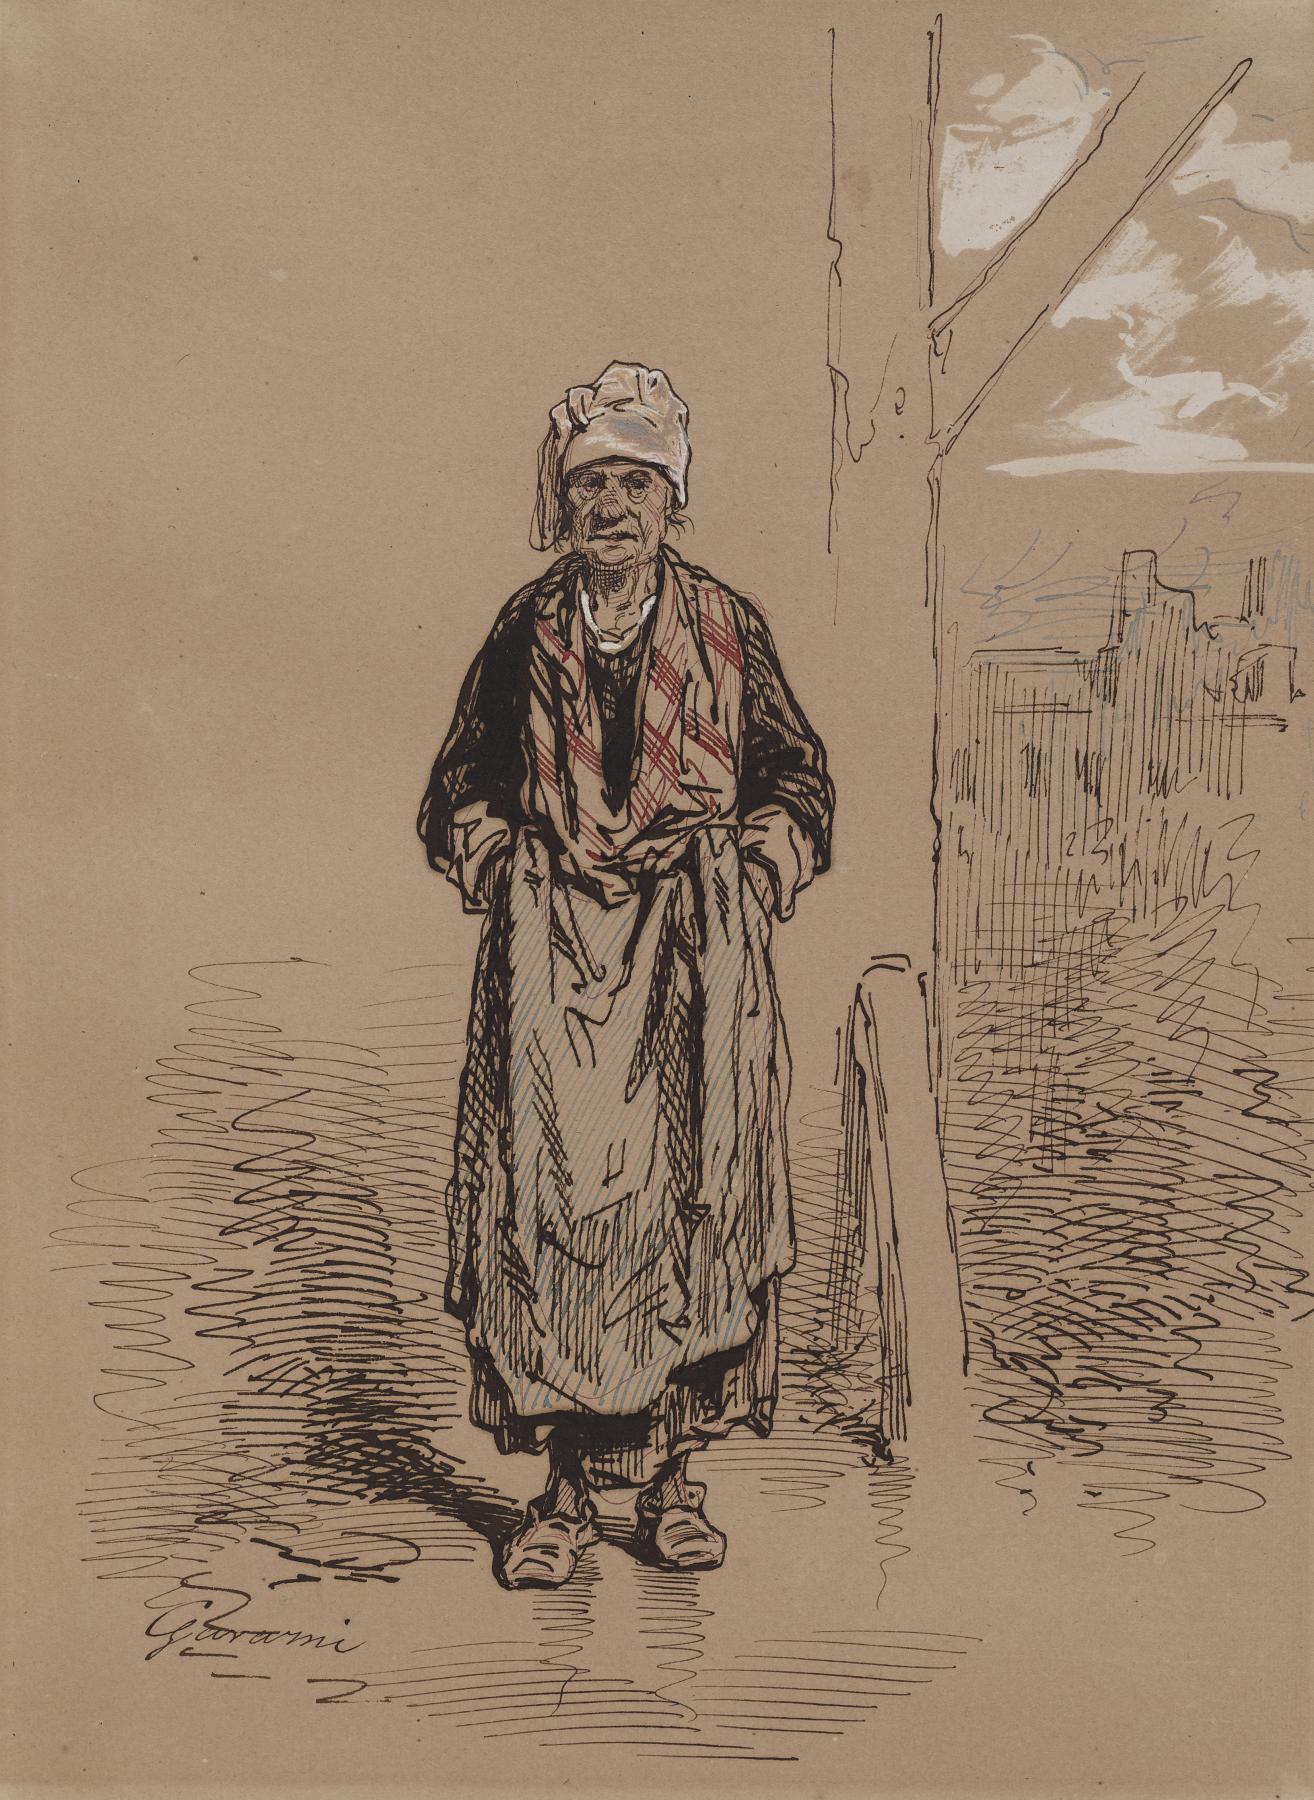 Image for Old Woman